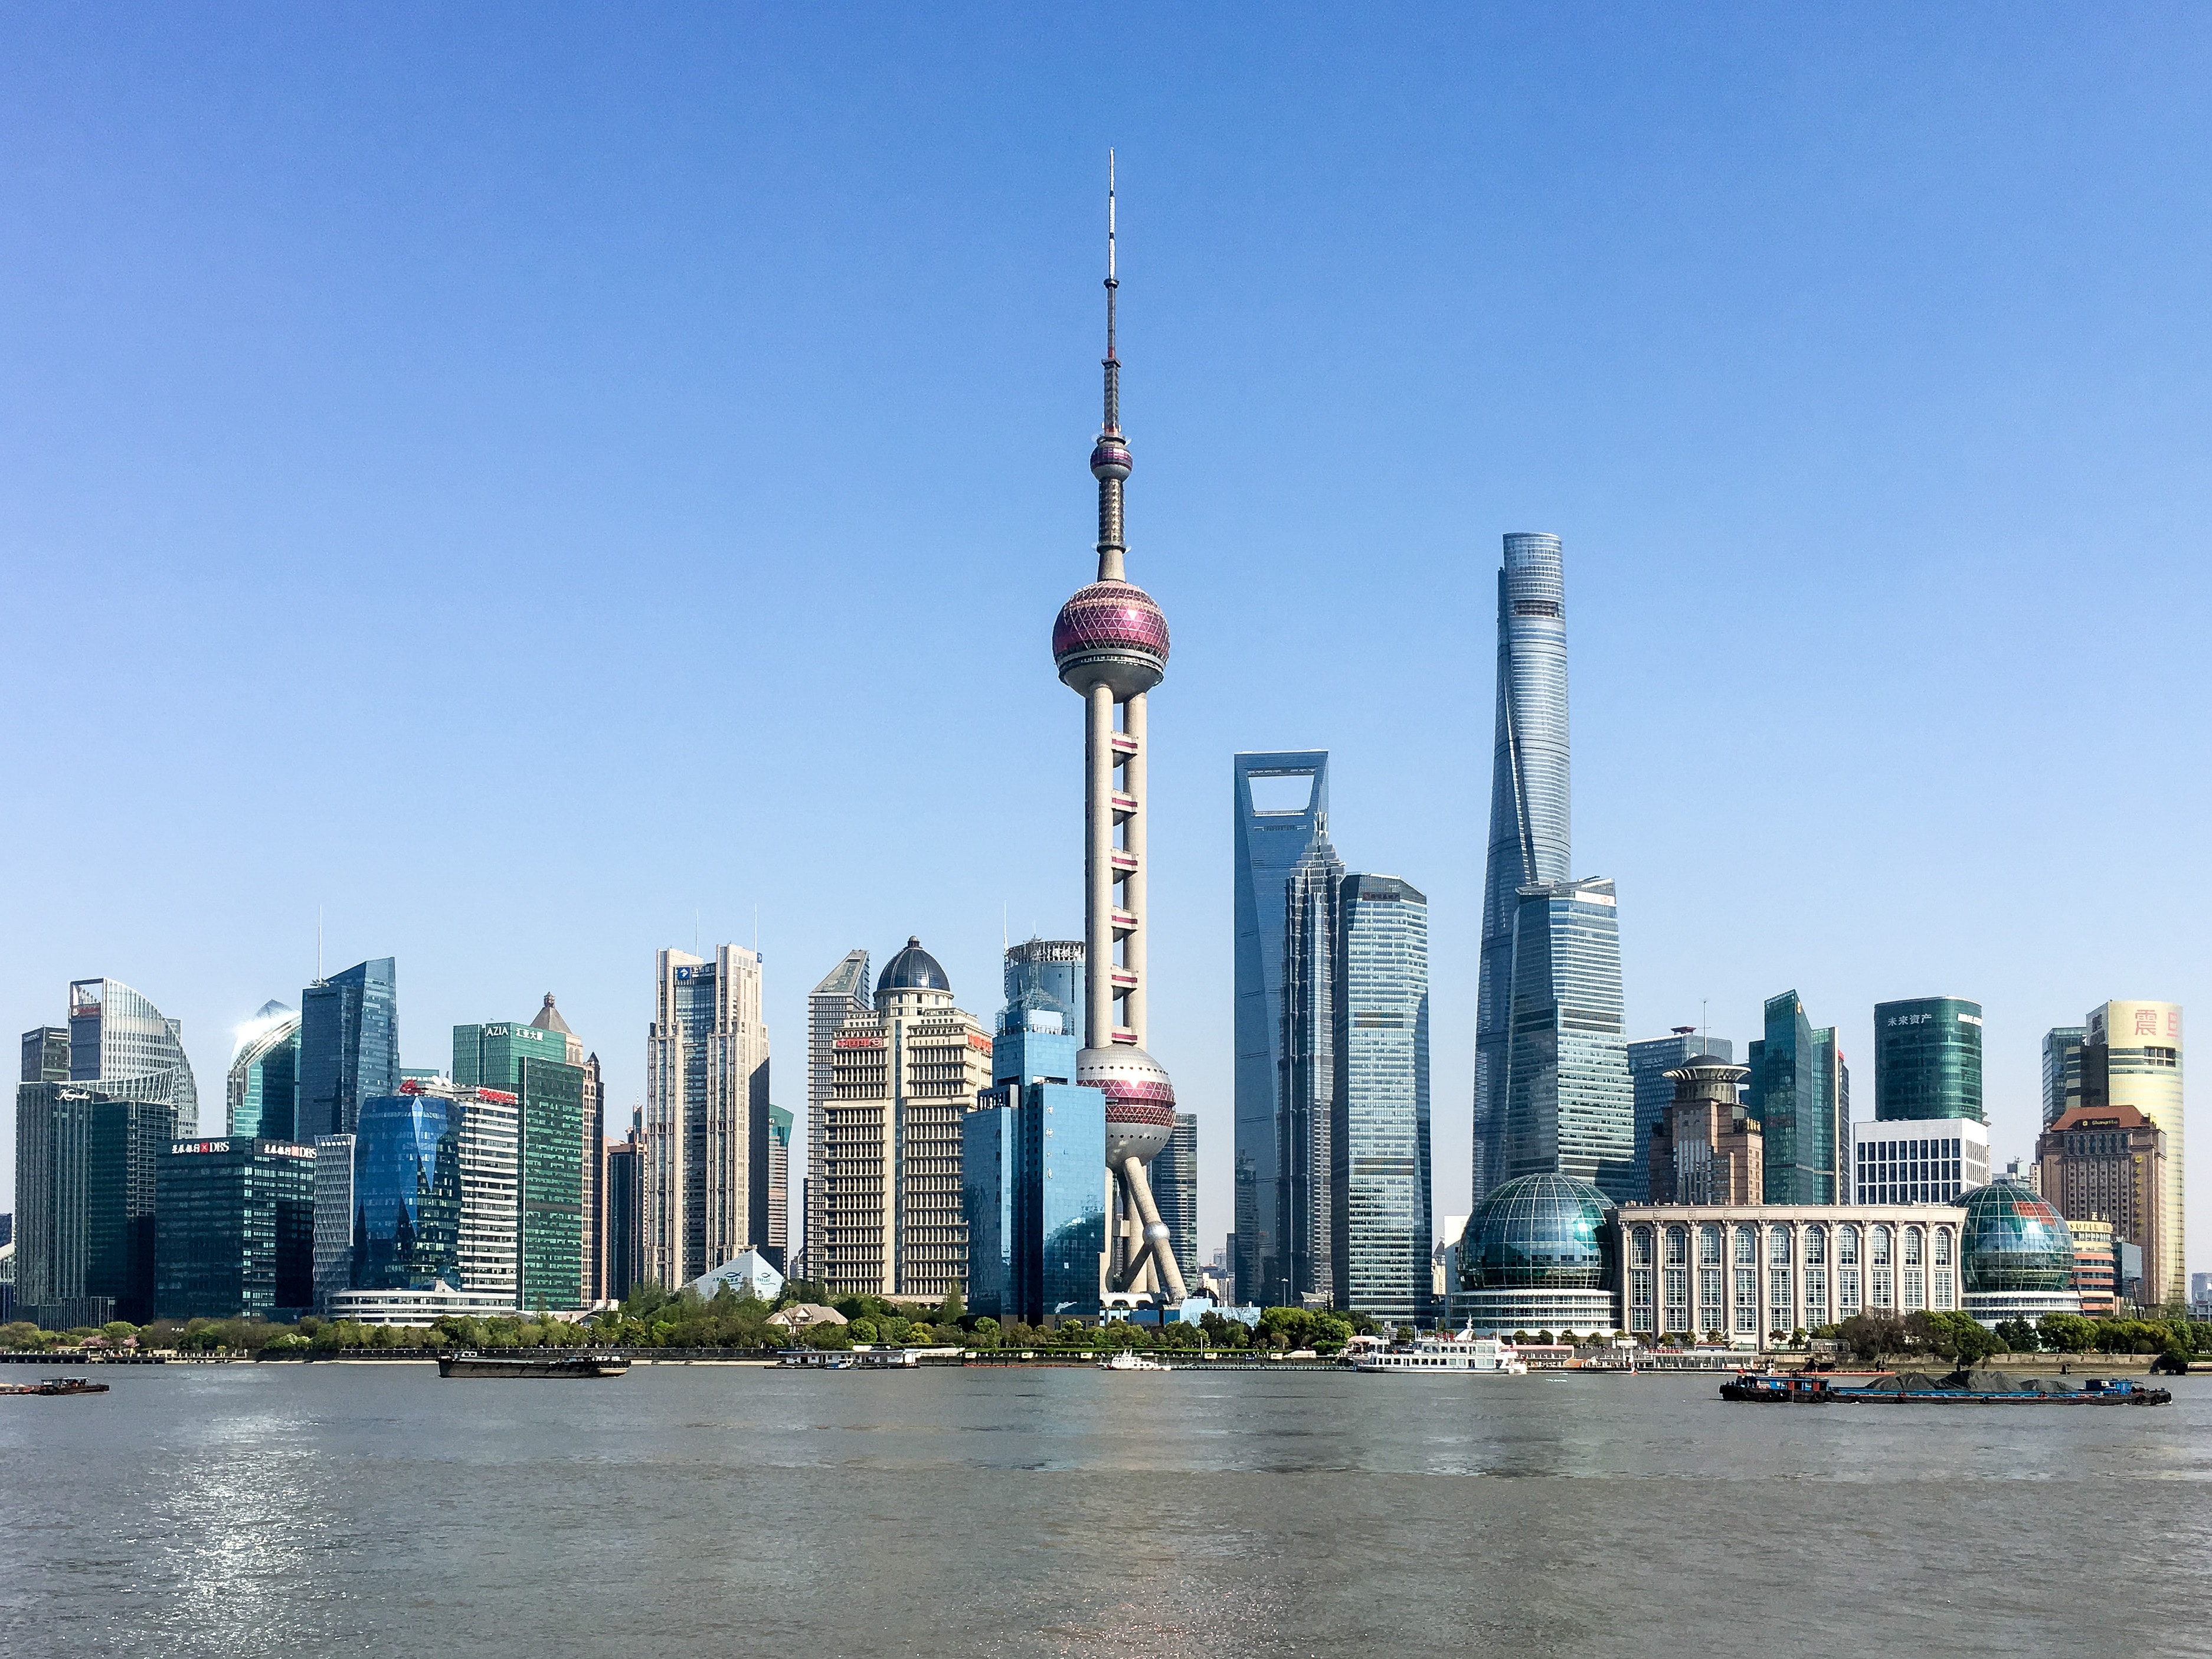 China’s digital yuan is now available to individuals and corporates in Shanghai